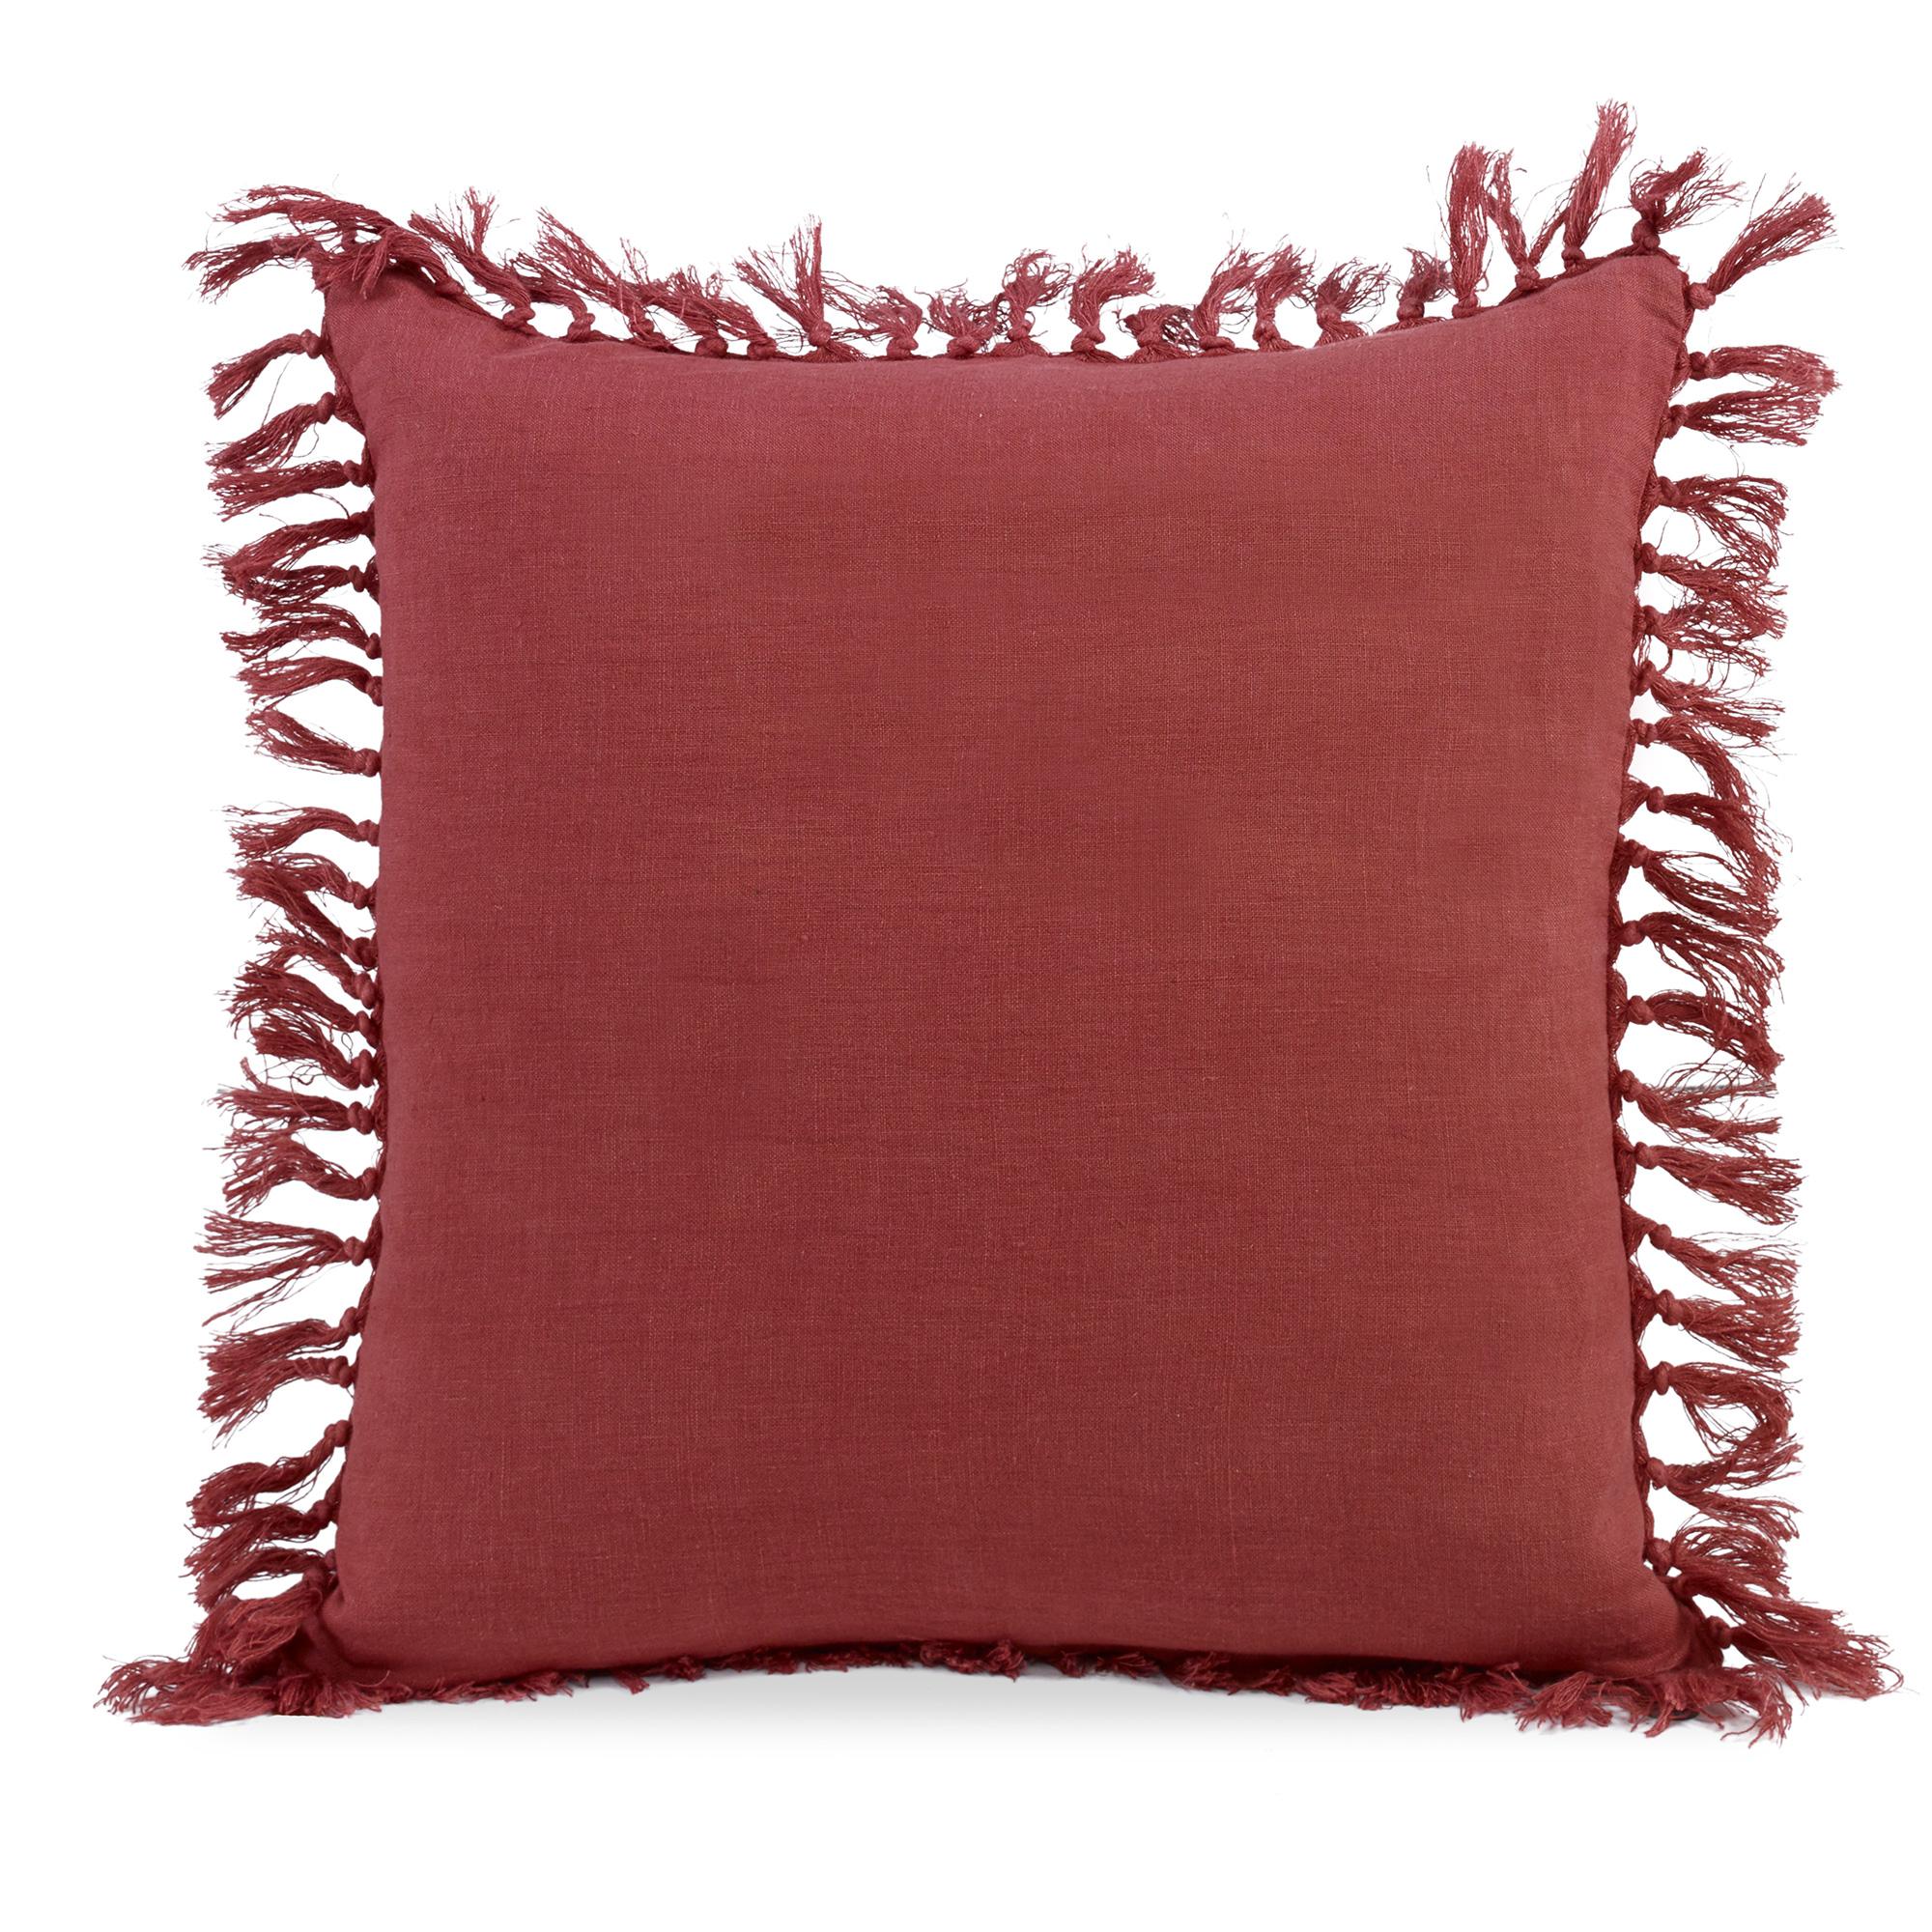 Red (QR-19255.BLUSH.0) Zoysia Linen Decorative Accent Pillow with Fringe by CuratedKravet